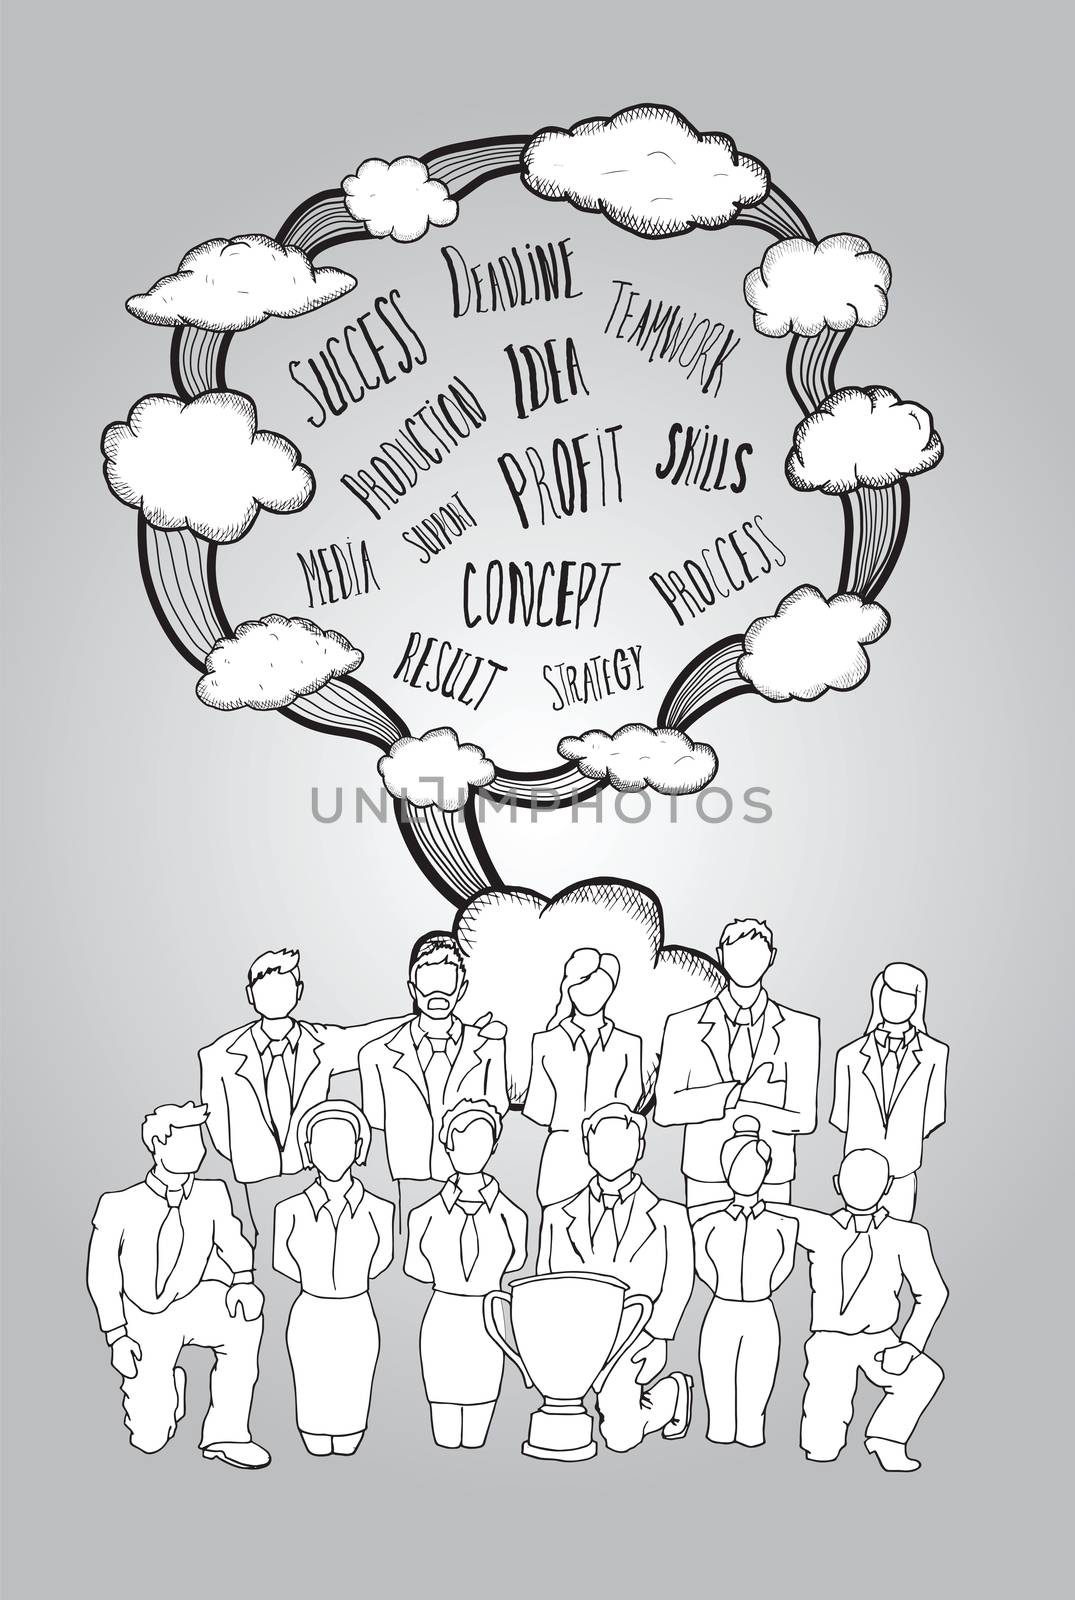 Teamwork concept with buzzwords and clouds by Wavebreakmedia